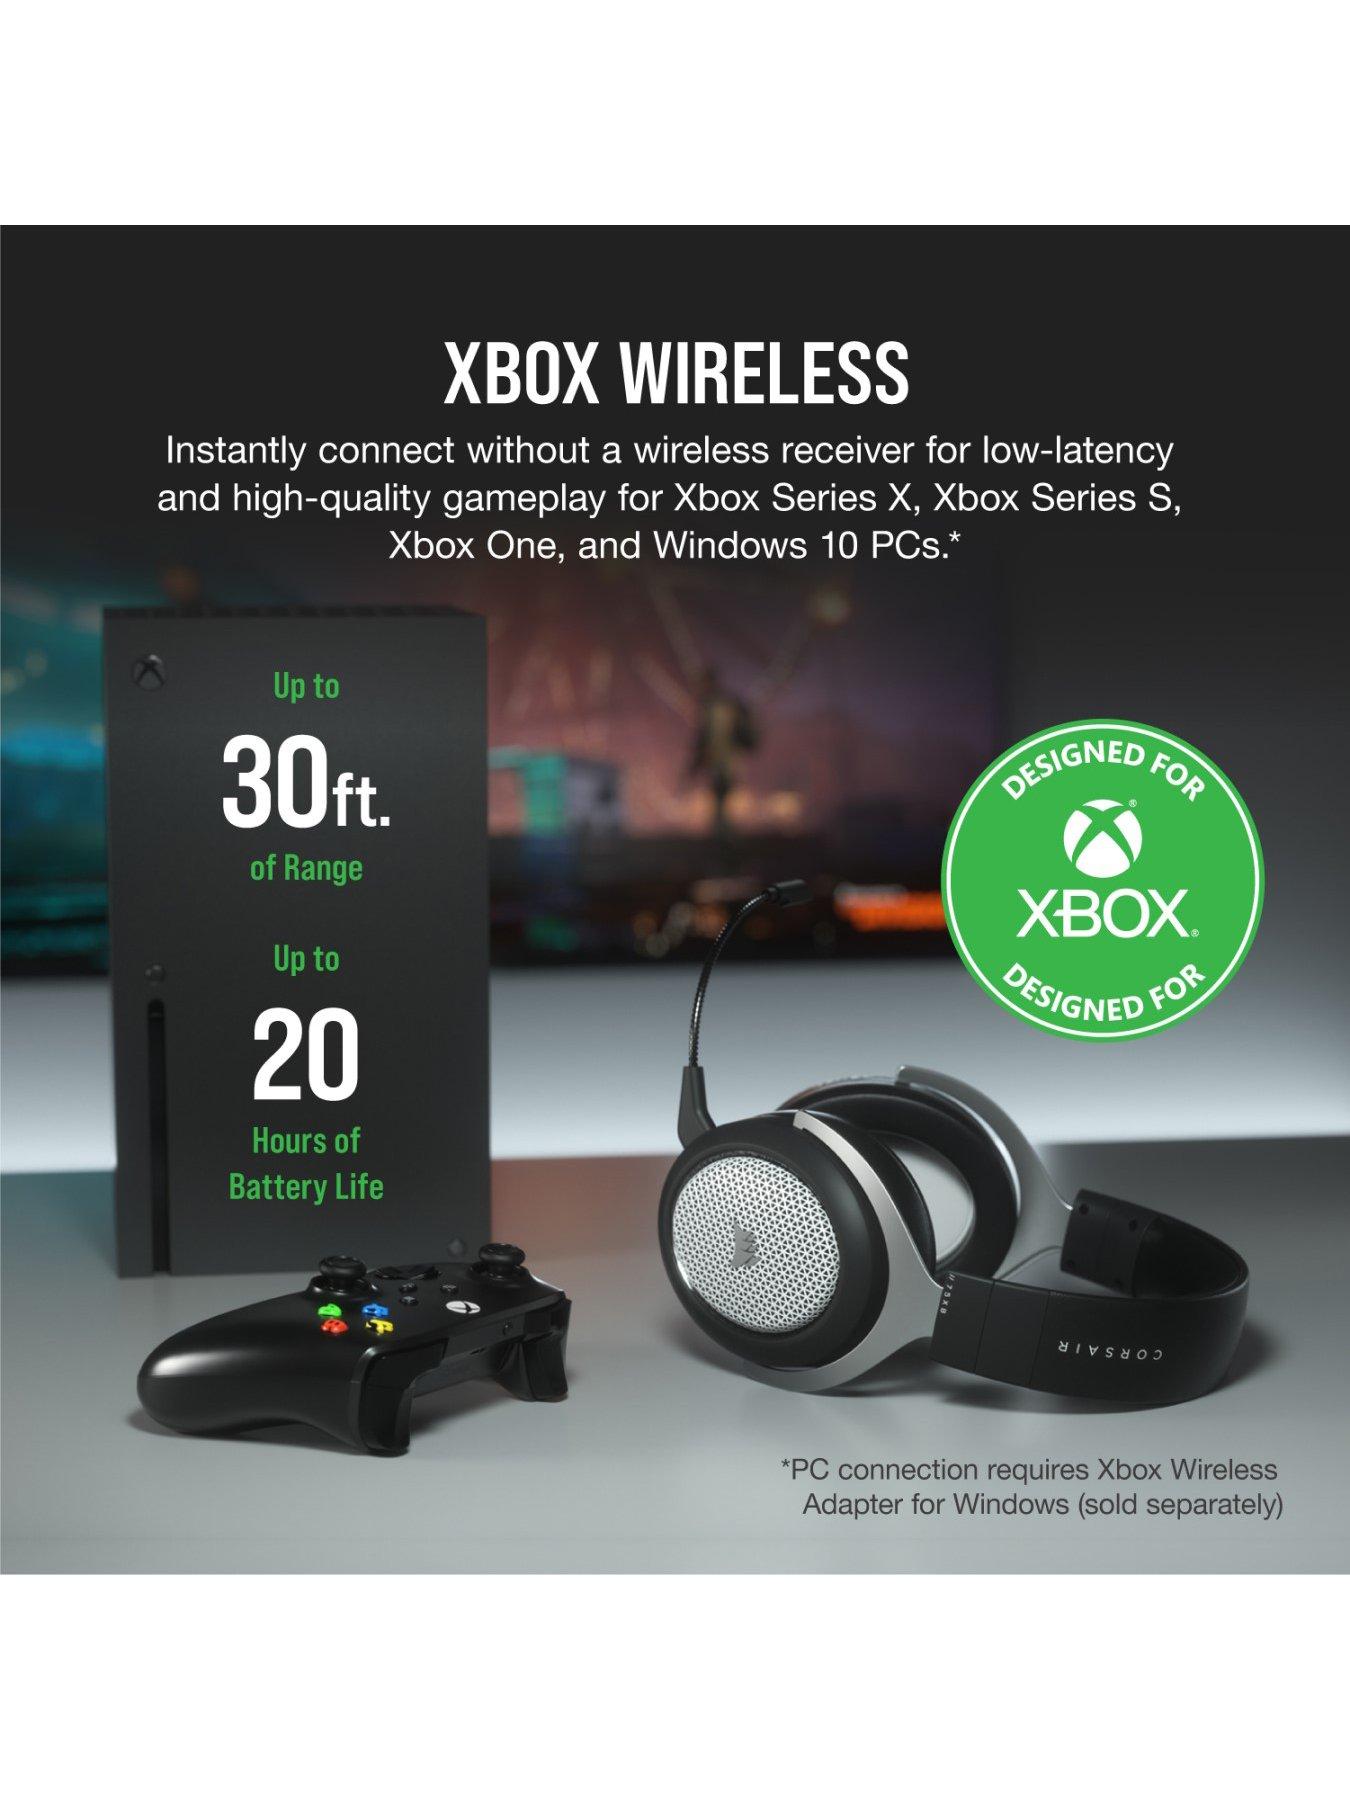 connecting corsair headset to xbox one